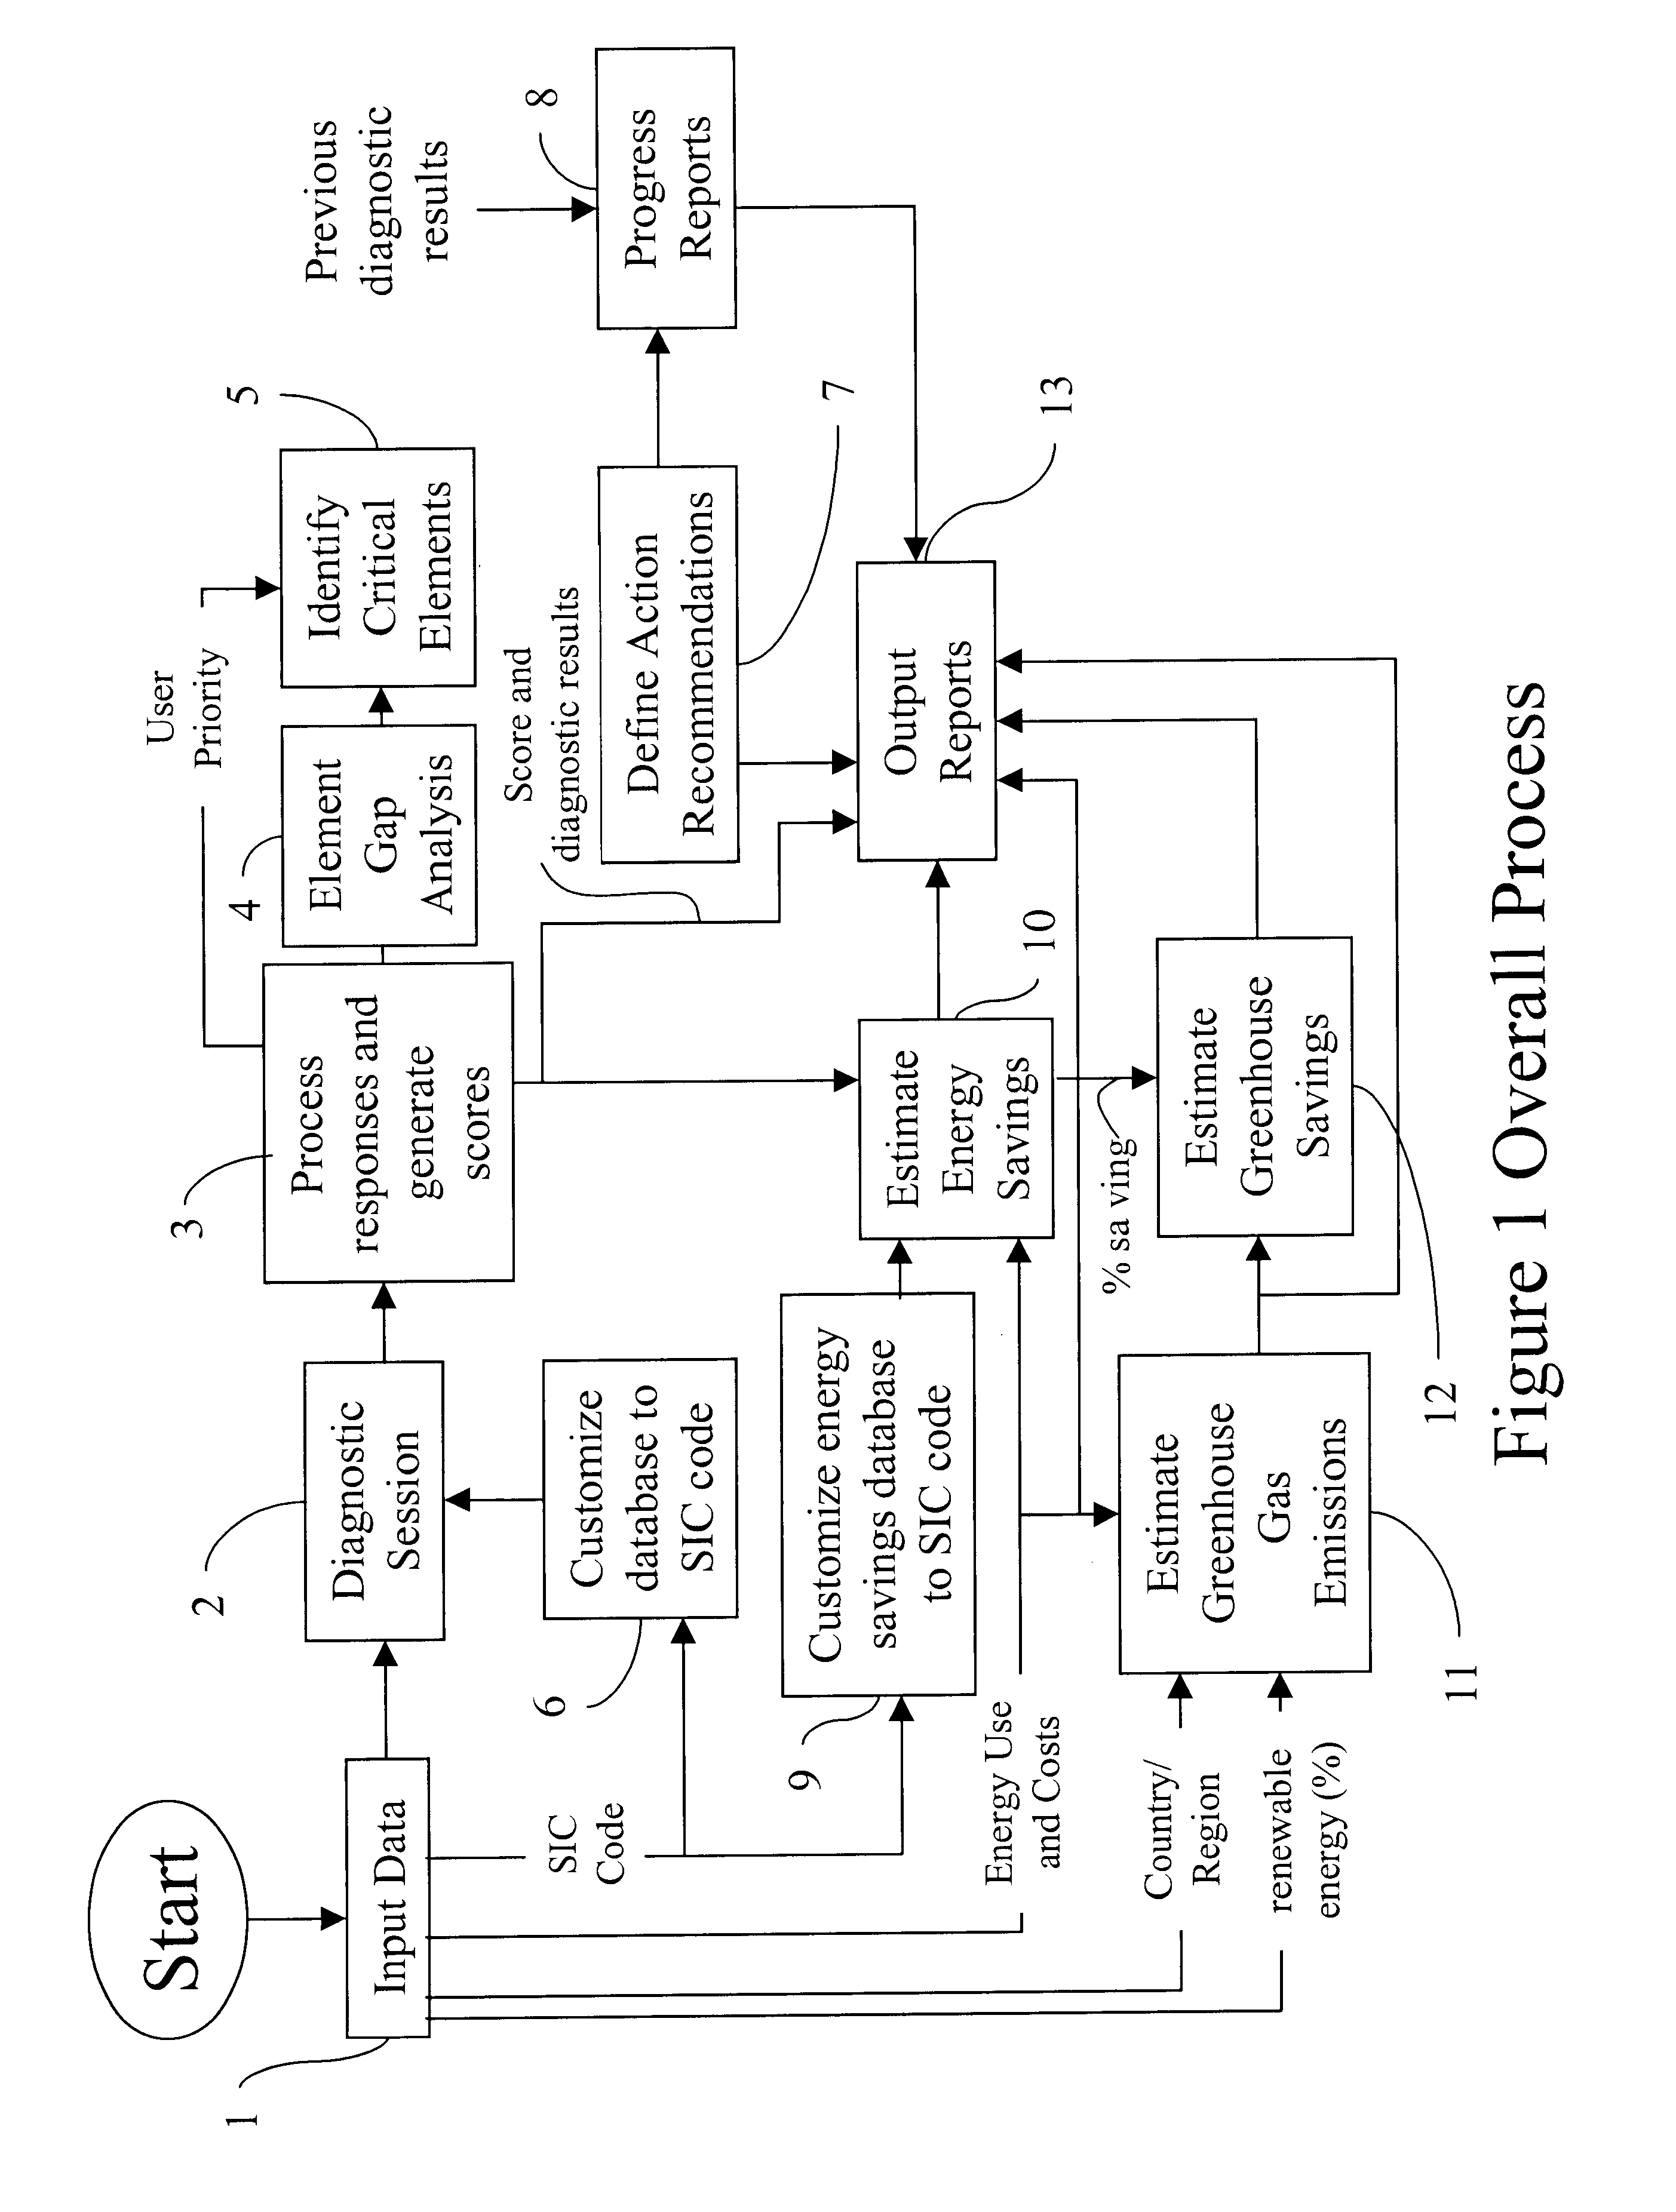 Computerized management system and method for energy performance evaluation and improvement